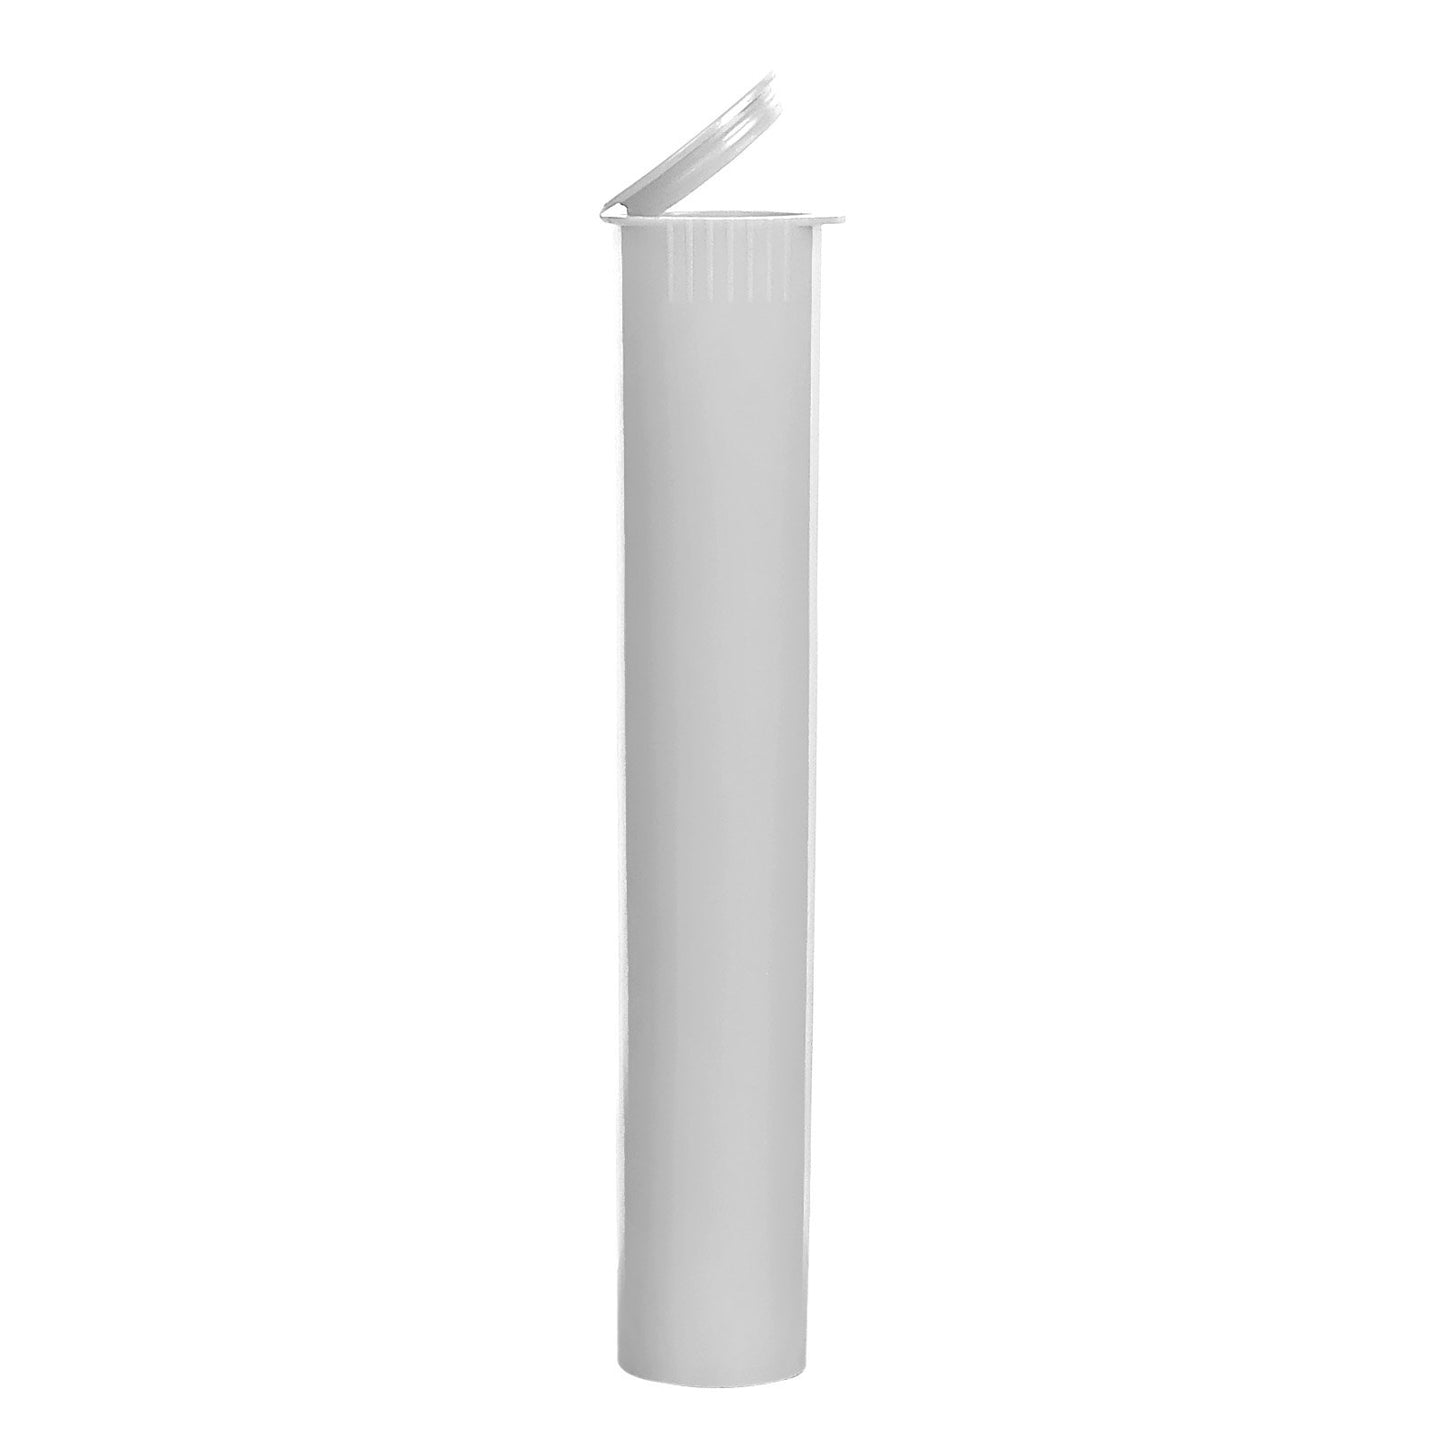  120mm RX Squeeze Tubes Opaque White 500 Count at Flower Power Packages